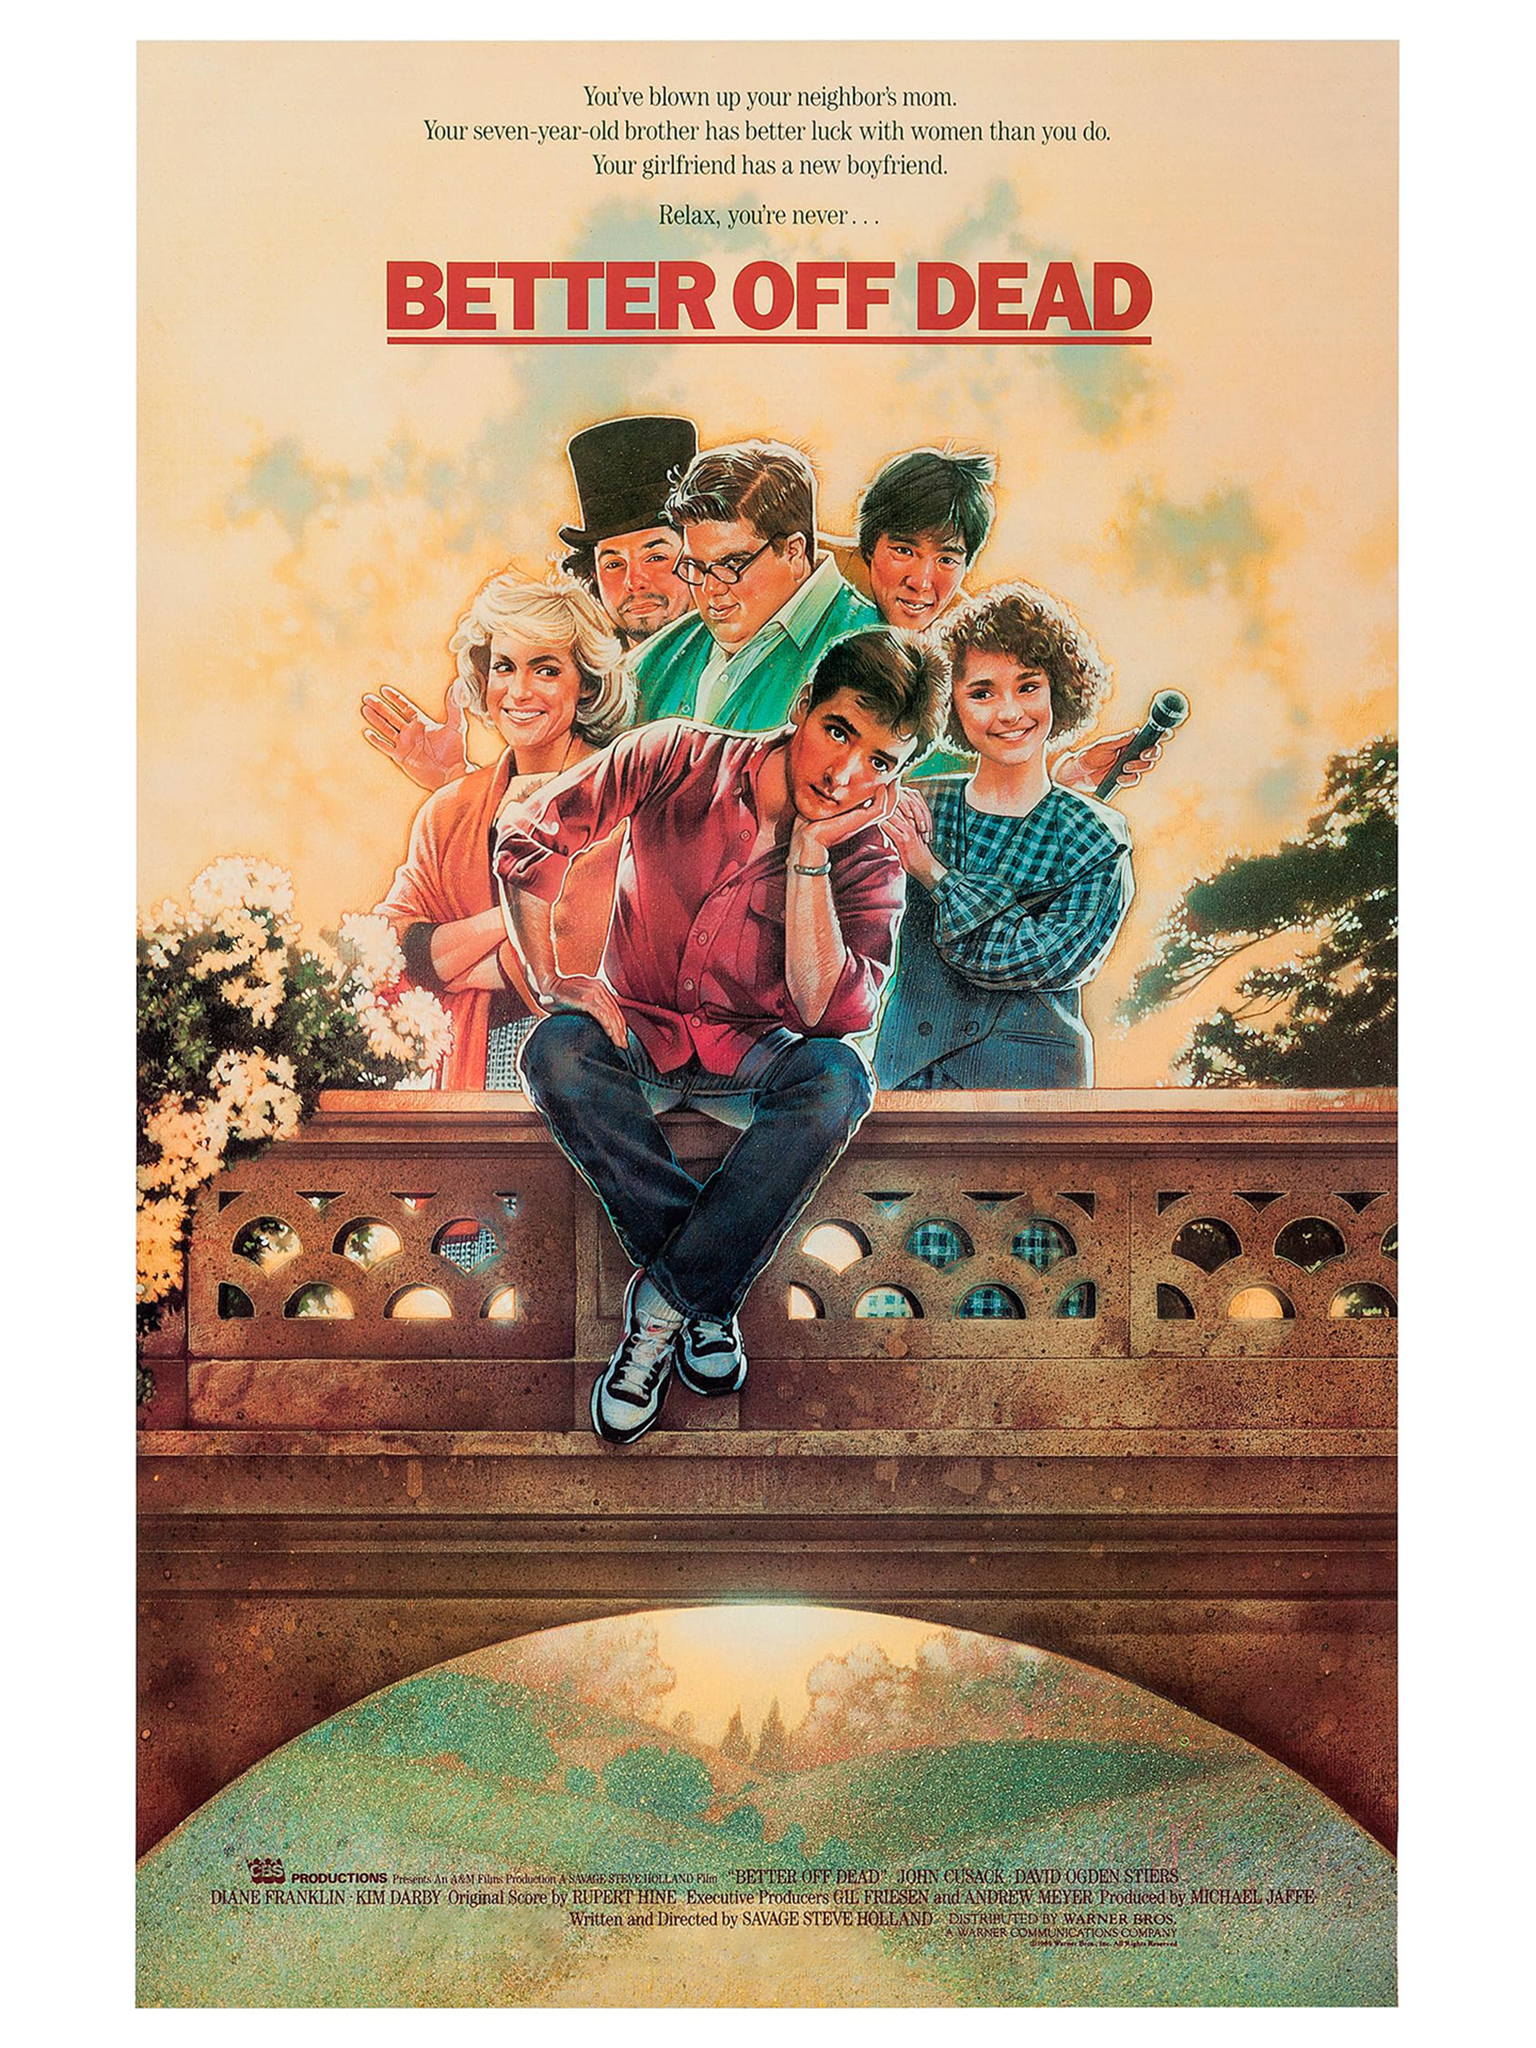 Better Off Dead pic